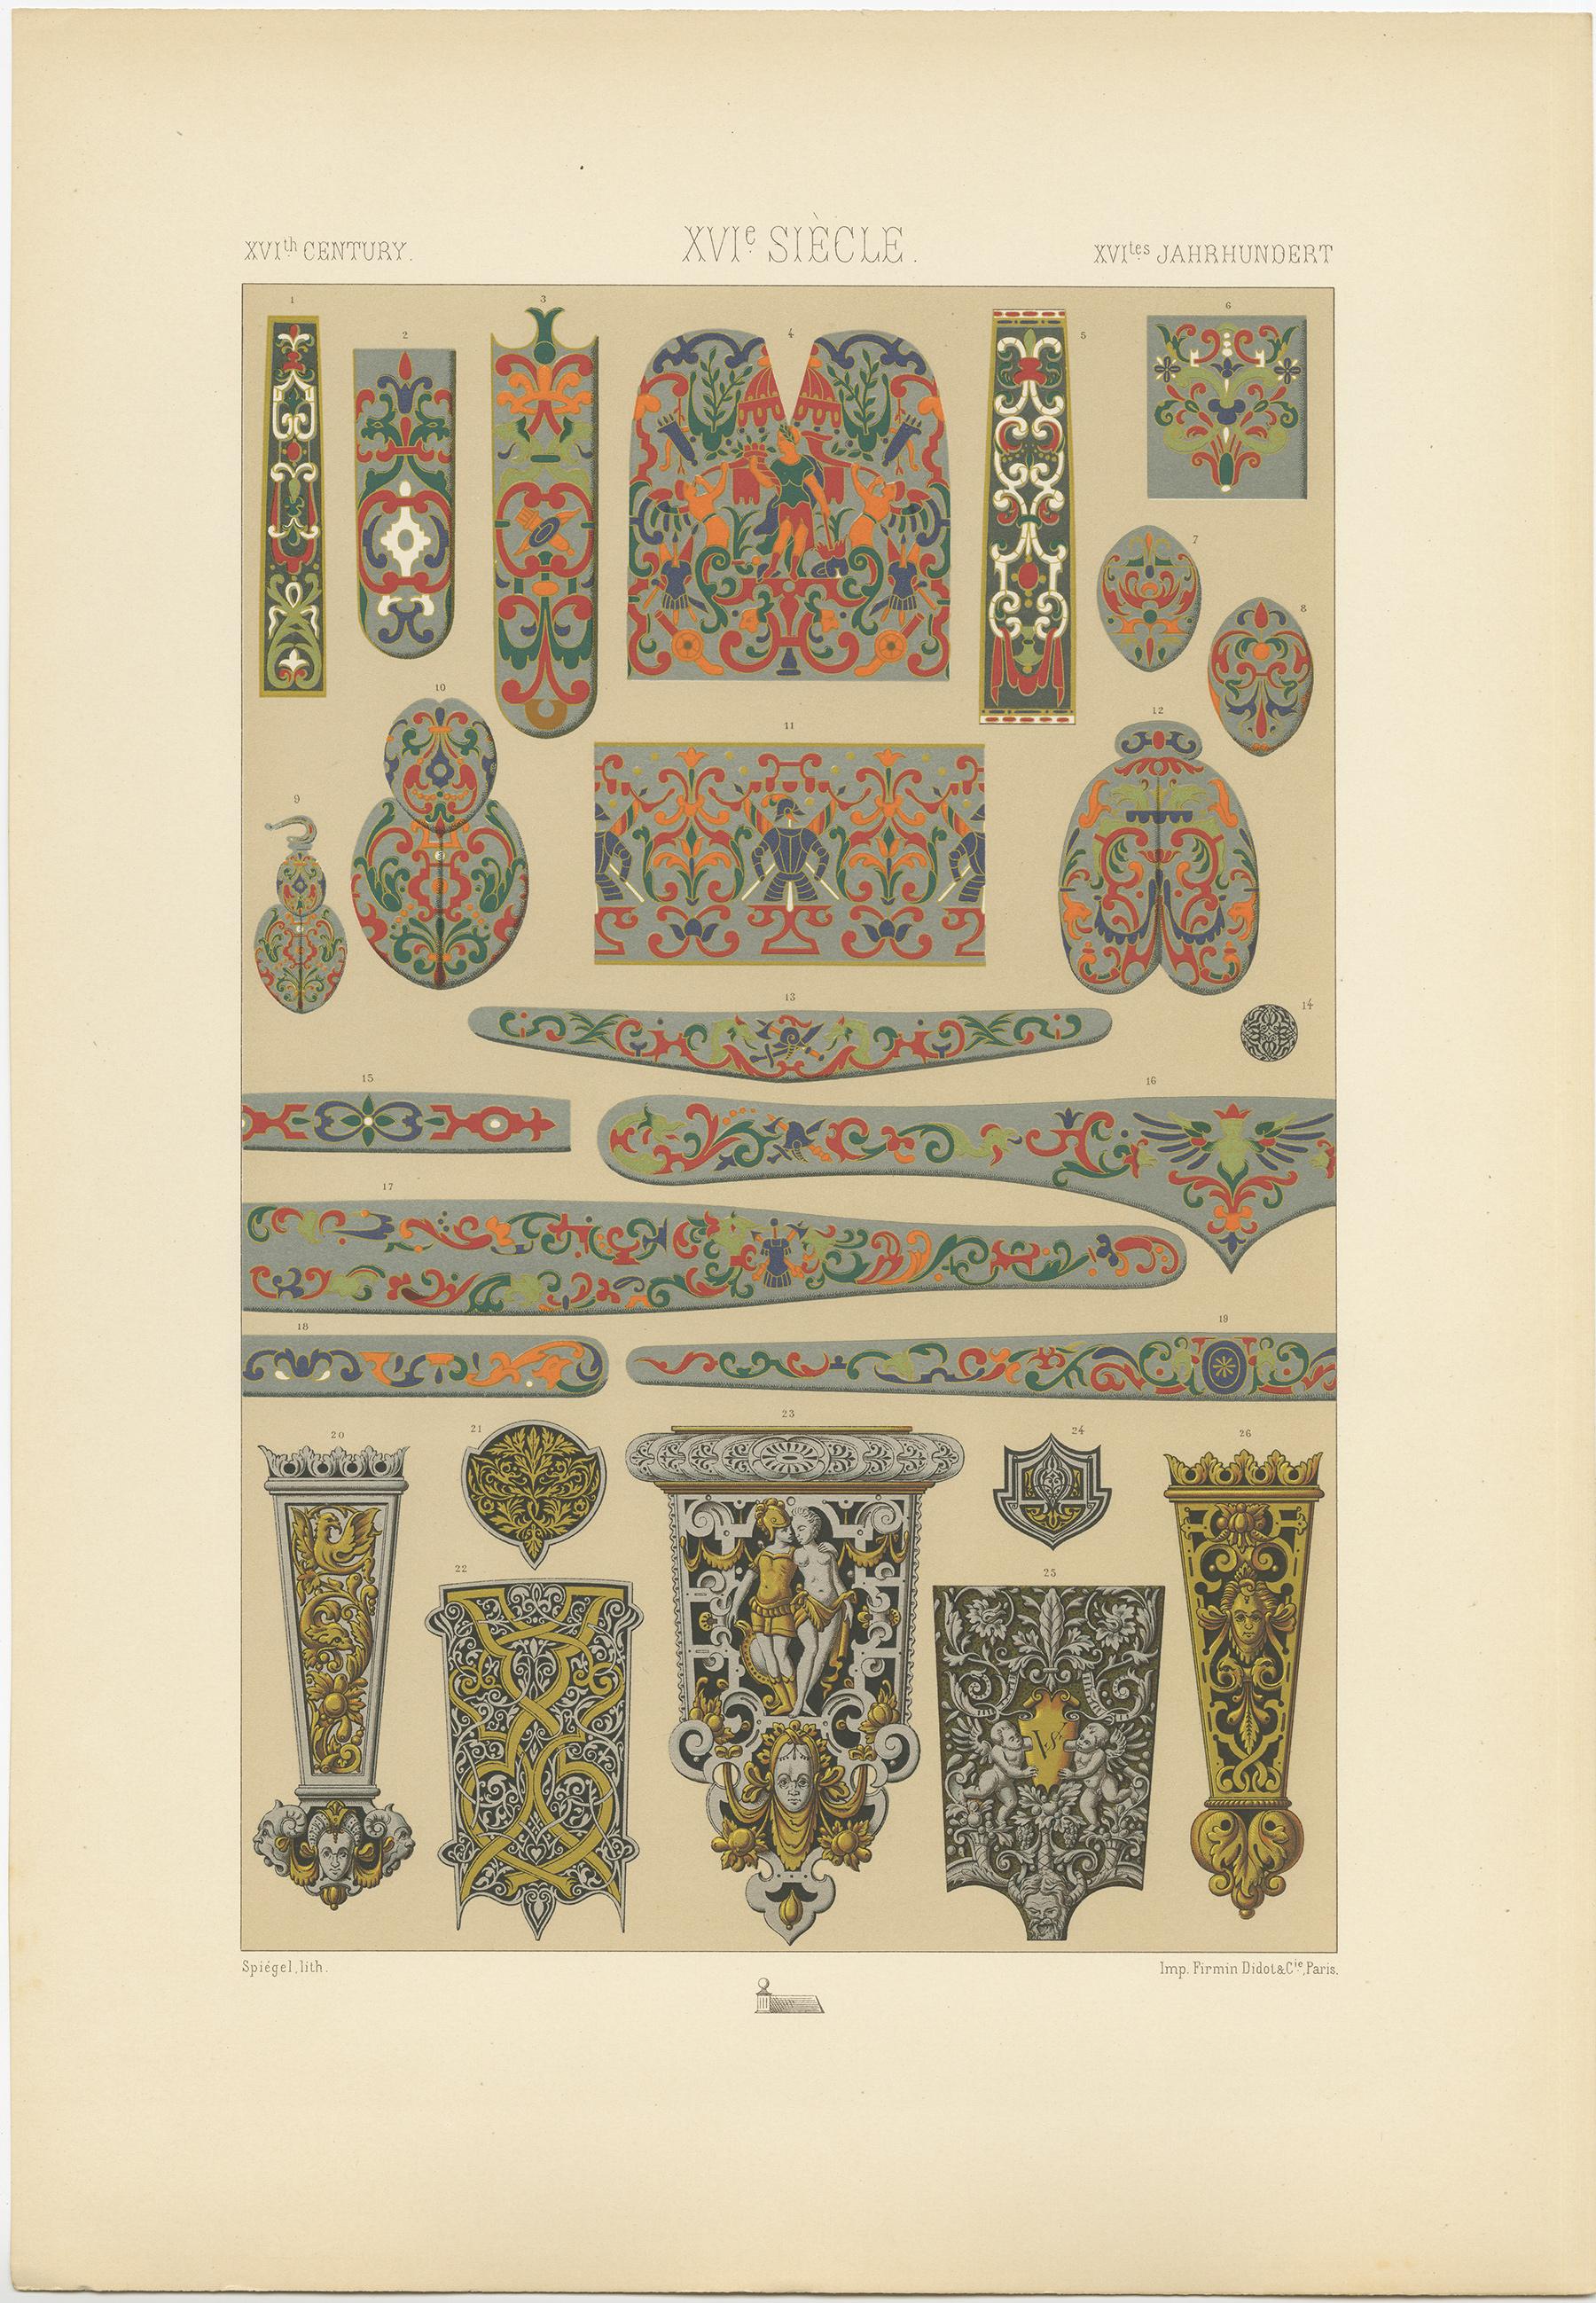 Antique print titled '16th Century - XVIc Siècle - XVILes Jahrhundert'. Chromolithograph of metalwork on swords ,daggers and their sheaths 16th century ornaments. This print originates from 'l'Ornement Polychrome' by Auguste Racinet. Published circa